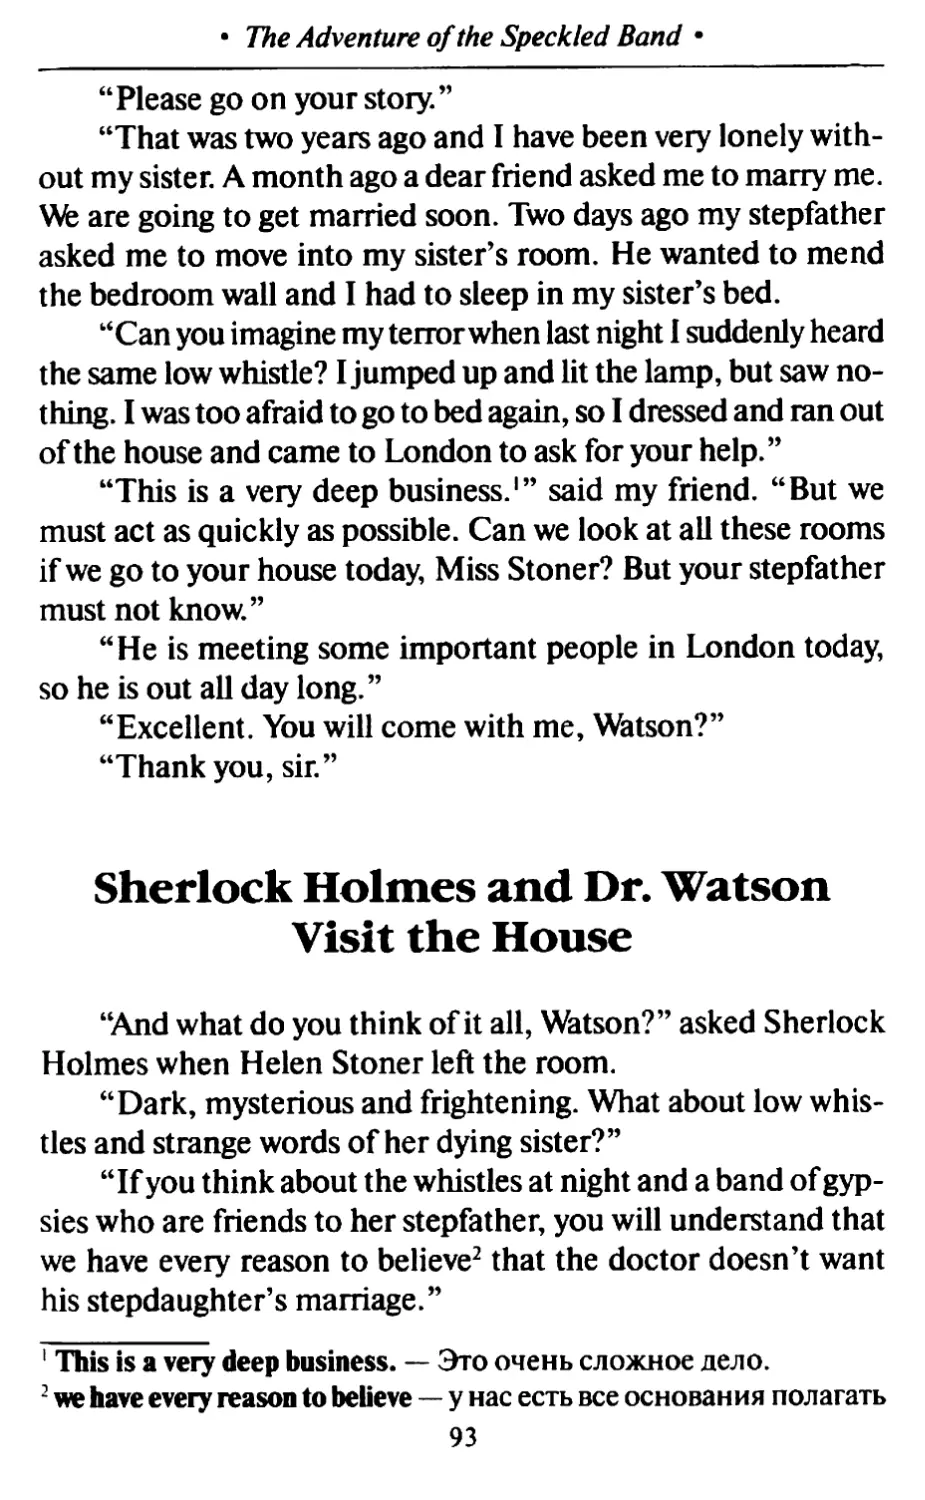 Sherlock Holmes and Dr. Watson Visit the House